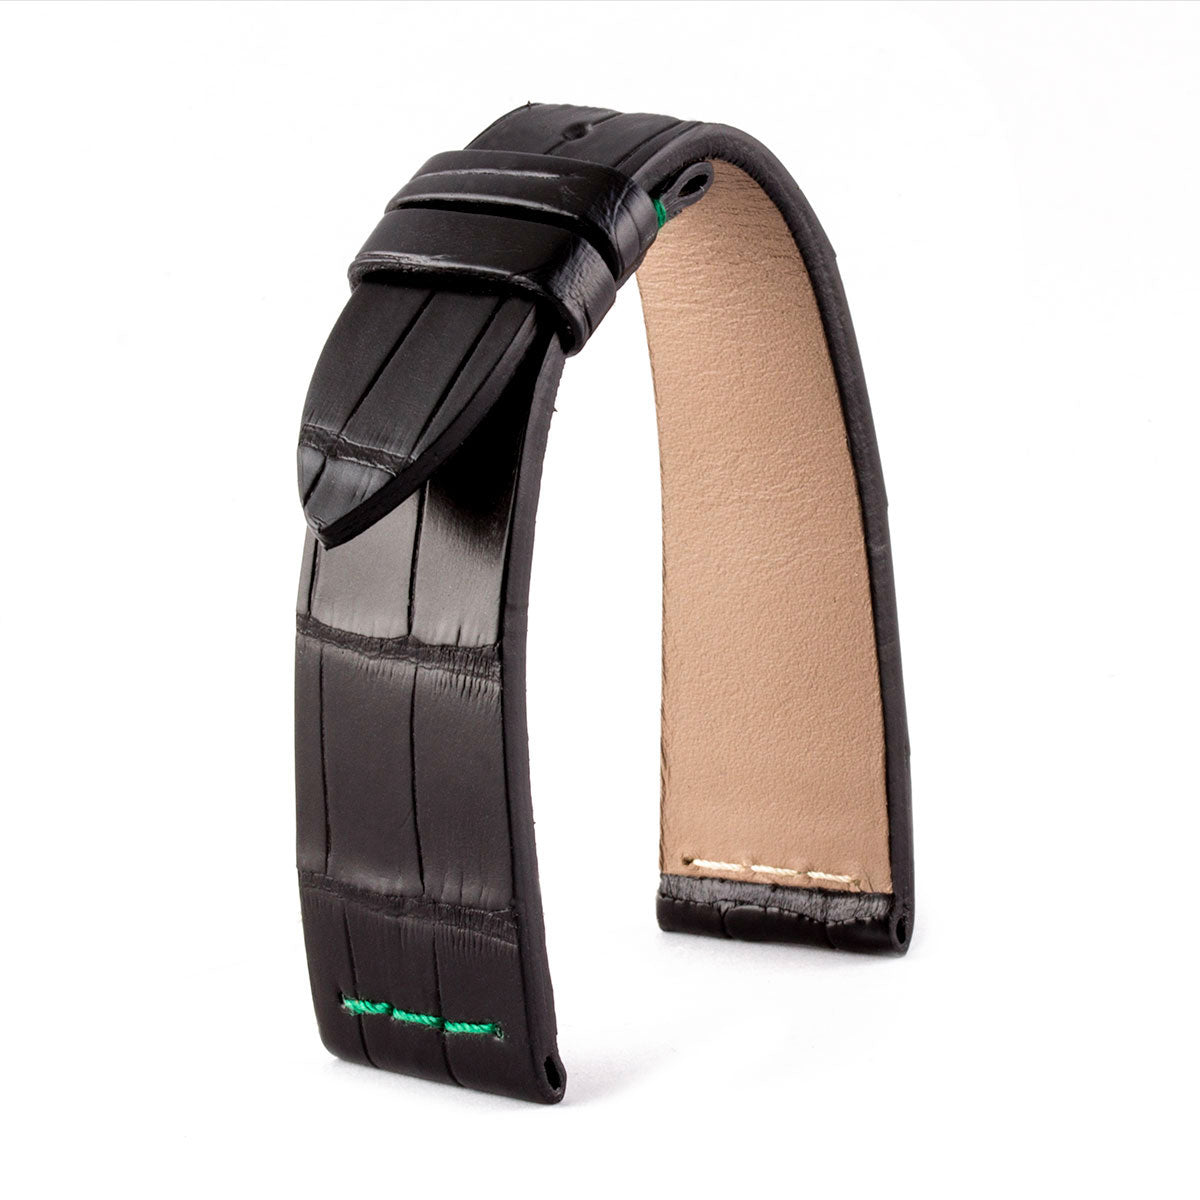 Curved end leather straps for your Rolex Submariner 'Kermit' ref. 16610LV